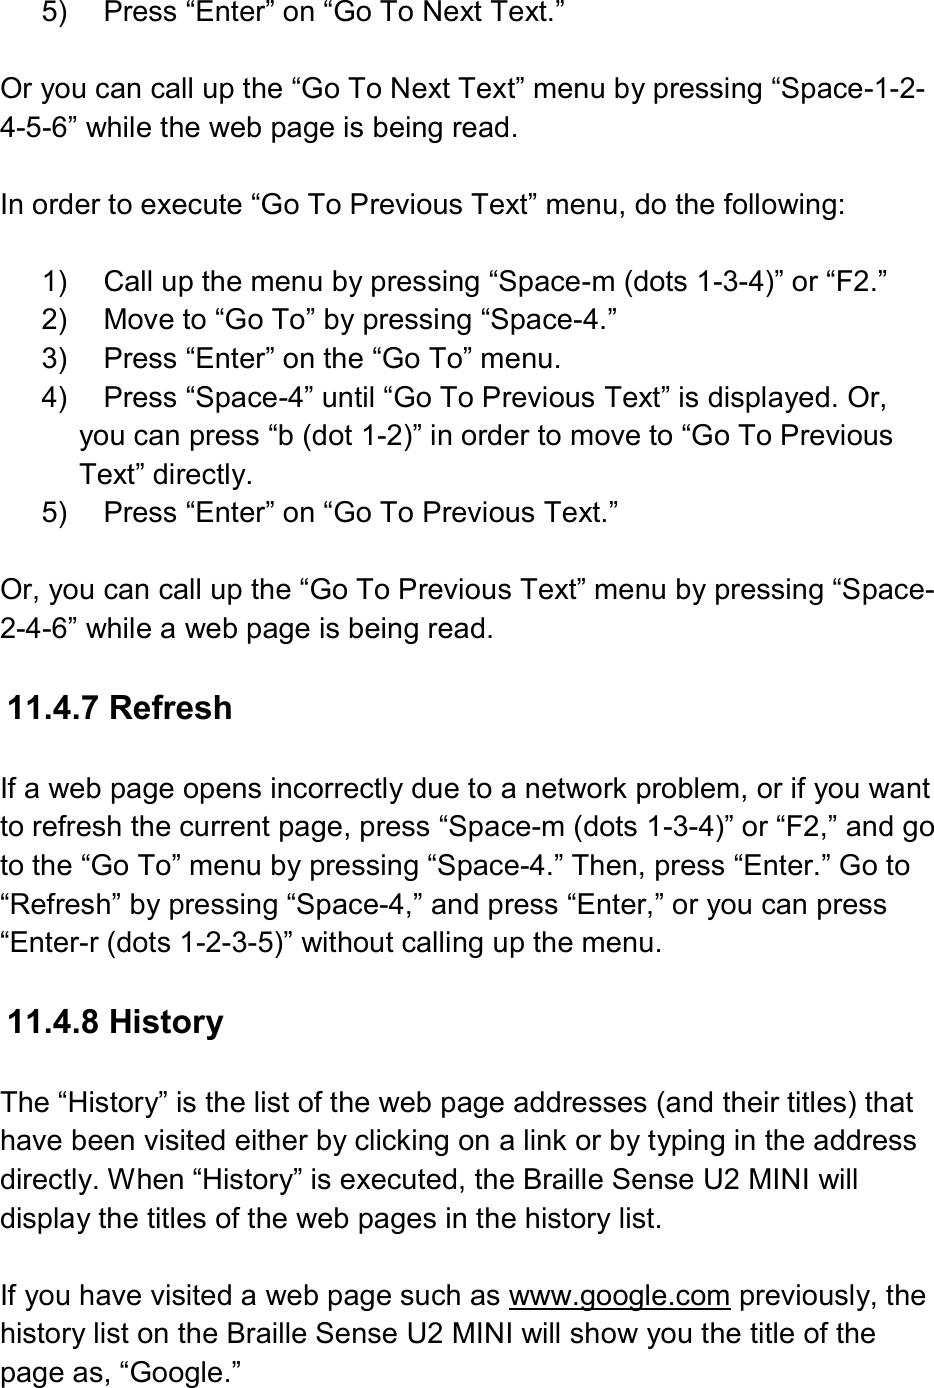  5)  Press “Enter” on “Go To Next Text.”  Or you can call up the “Go To Next Text” menu by pressing “Space-1-2-4-5-6” while the web page is being read.  In order to execute “Go To Previous Text” menu, do the following:  1)  Call up the menu by pressing “Space-m (dots 1-3-4)” or “F2.” 2)  Move to “Go To” by pressing “Space-4.” 3)  Press “Enter” on the “Go To” menu. 4)  Press “Space-4” until “Go To Previous Text” is displayed. Or, you can press “b (dot 1-2)” in order to move to “Go To Previous Text” directly. 5)  Press “Enter” on “Go To Previous Text.”  Or, you can call up the “Go To Previous Text” menu by pressing “Space-2-4-6” while a web page is being read.  11.4.7 Refresh  If a web page opens incorrectly due to a network problem, or if you want to refresh the current page, press “Space-m (dots 1-3-4)” or “F2,” and go to the “Go To” menu by pressing “Space-4.” Then, press “Enter.” Go to “Refresh” by pressing “Space-4,” and press “Enter,” or you can press “Enter-r (dots 1-2-3-5)” without calling up the menu.  11.4.8 History  The “History” is the list of the web page addresses (and their titles) that have been visited either by clicking on a link or by typing in the address directly. When “History” is executed, the Braille Sense U2 MINI will display the titles of the web pages in the history list.  If you have visited a web page such as www.google.com previously, the history list on the Braille Sense U2 MINI will show you the title of the page as, “Google.” 